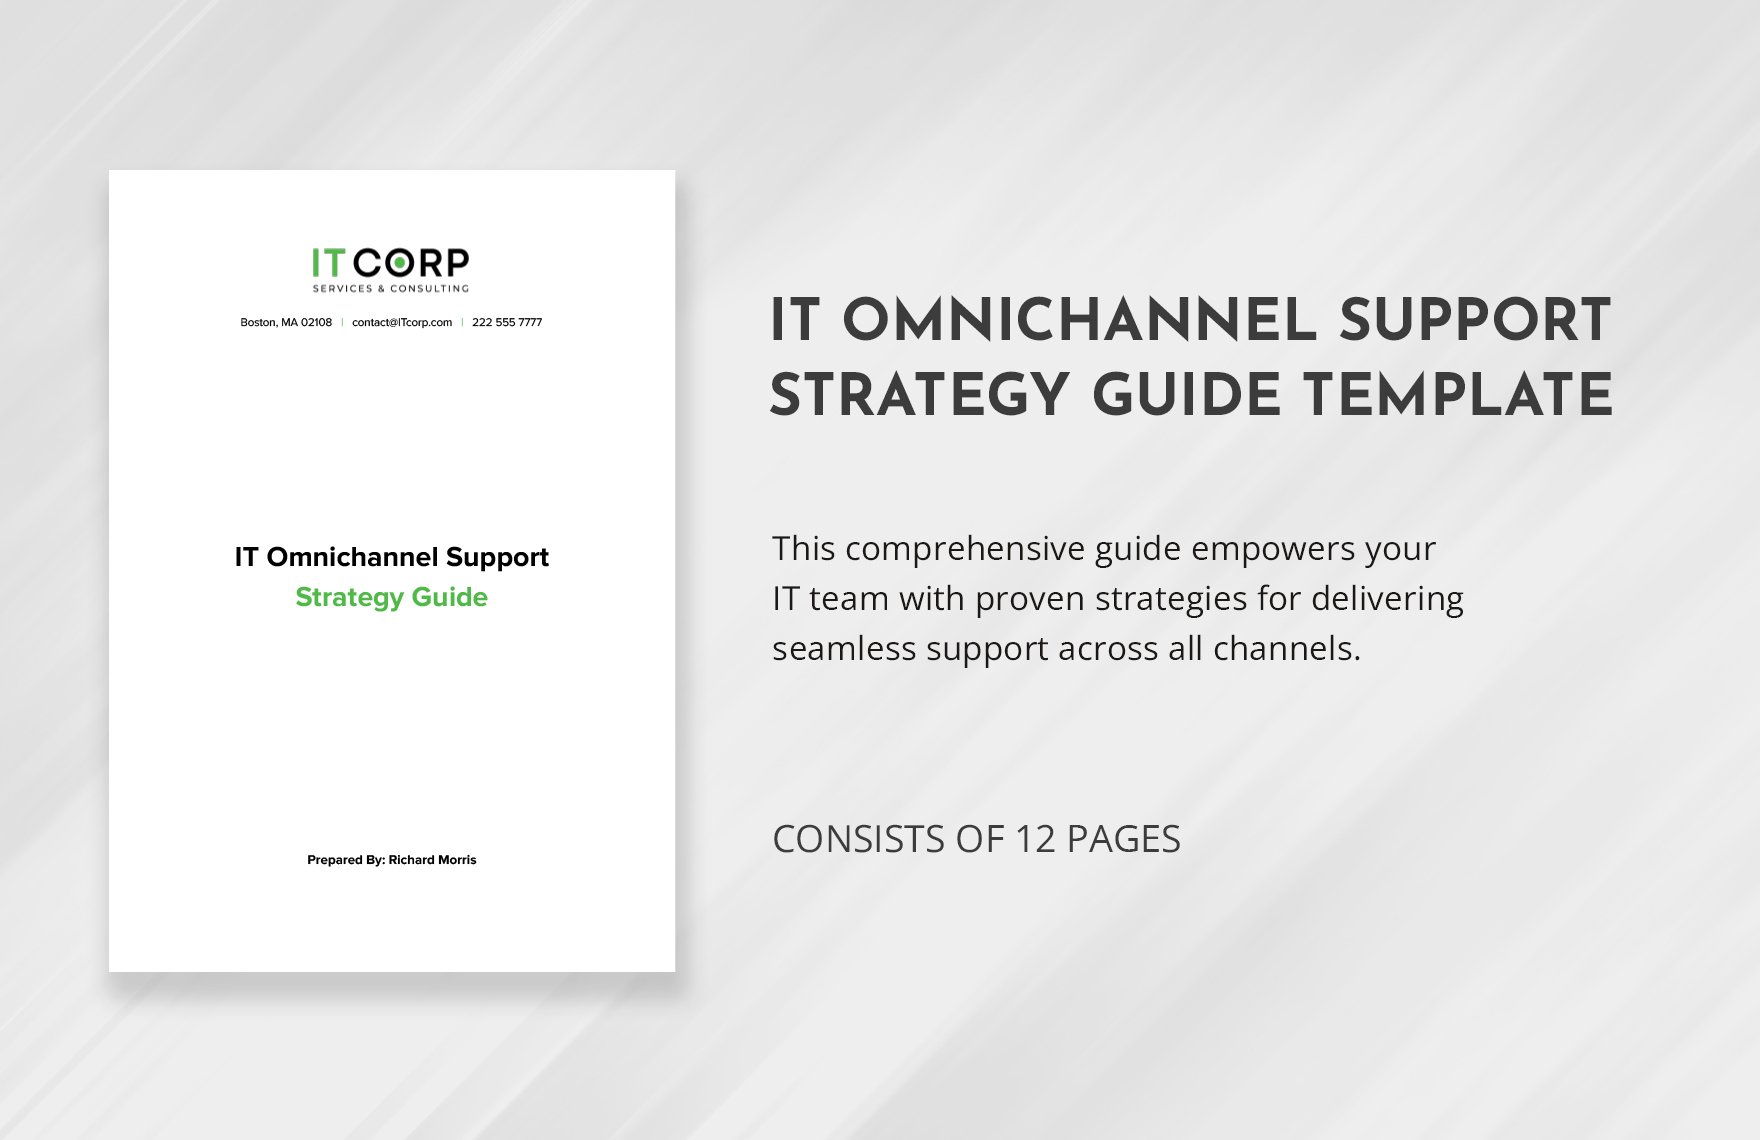 IT Omnichannel Support Strategy Guide Template